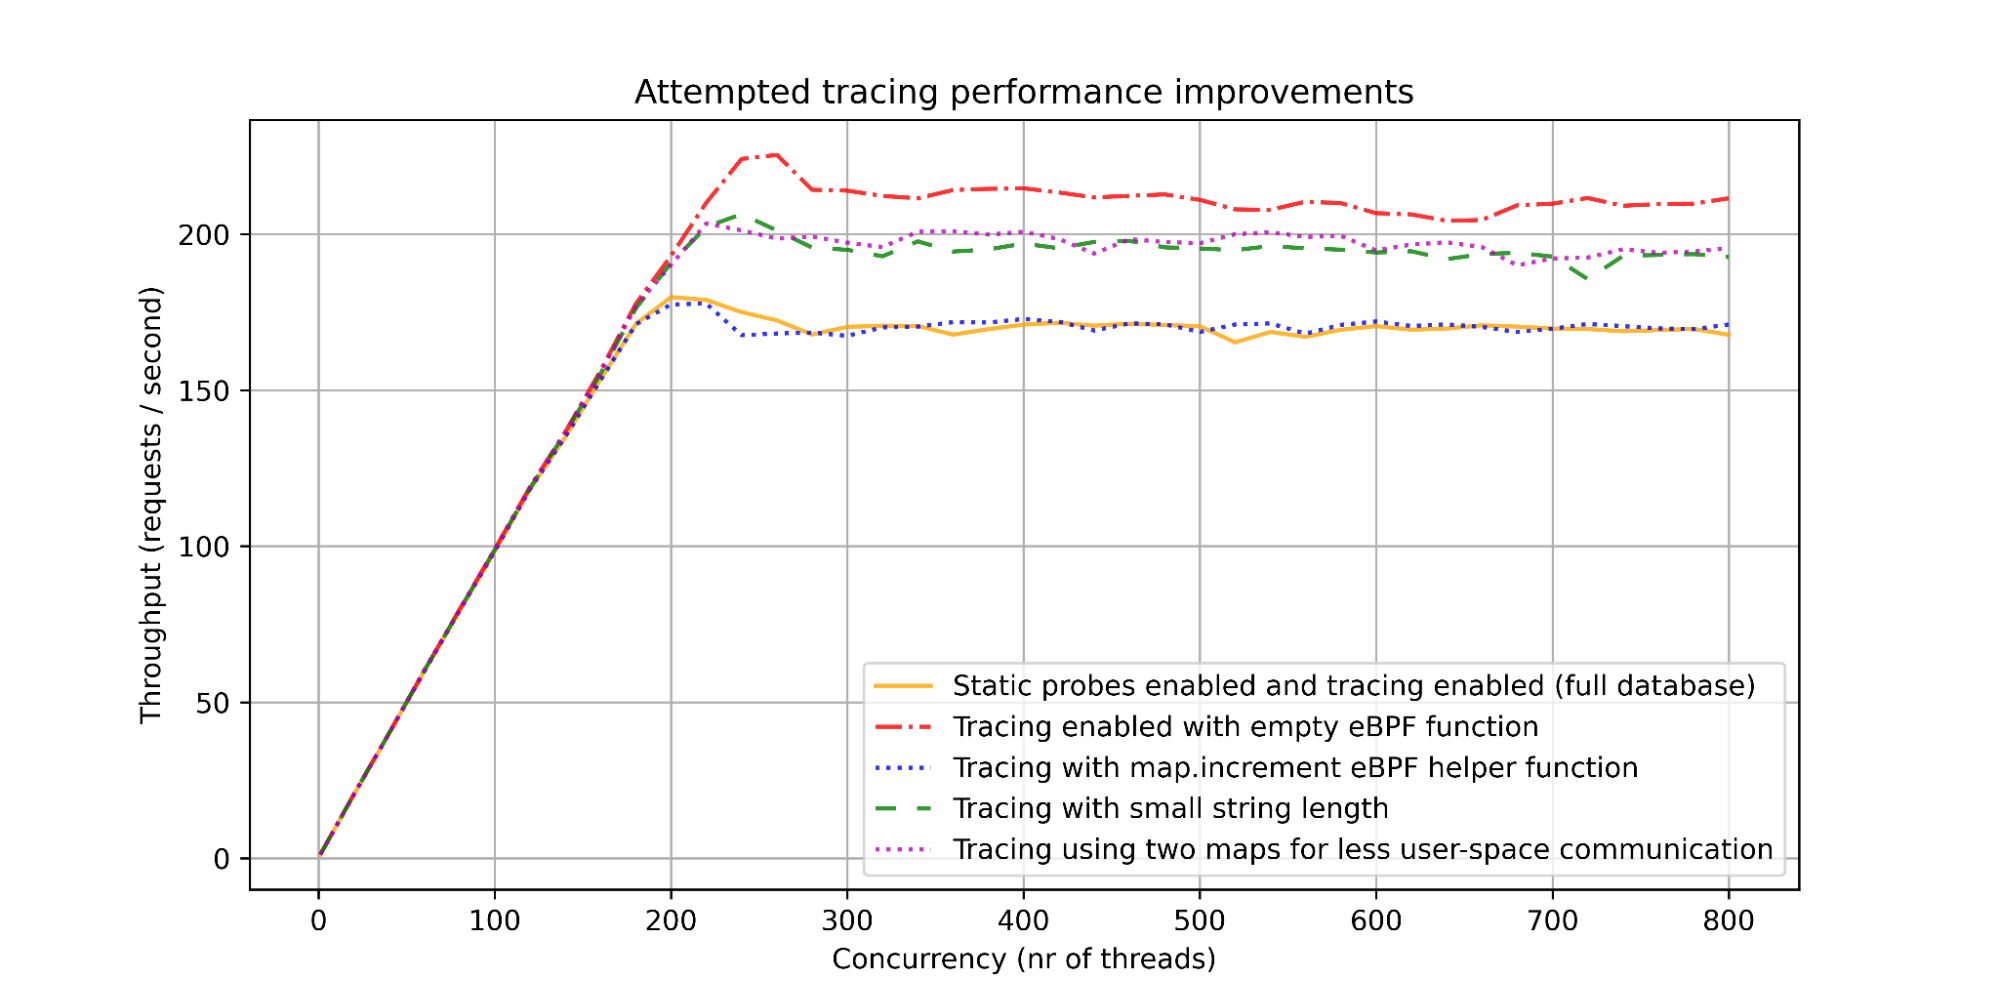 ARVOS - Attempted tracing performance improvements